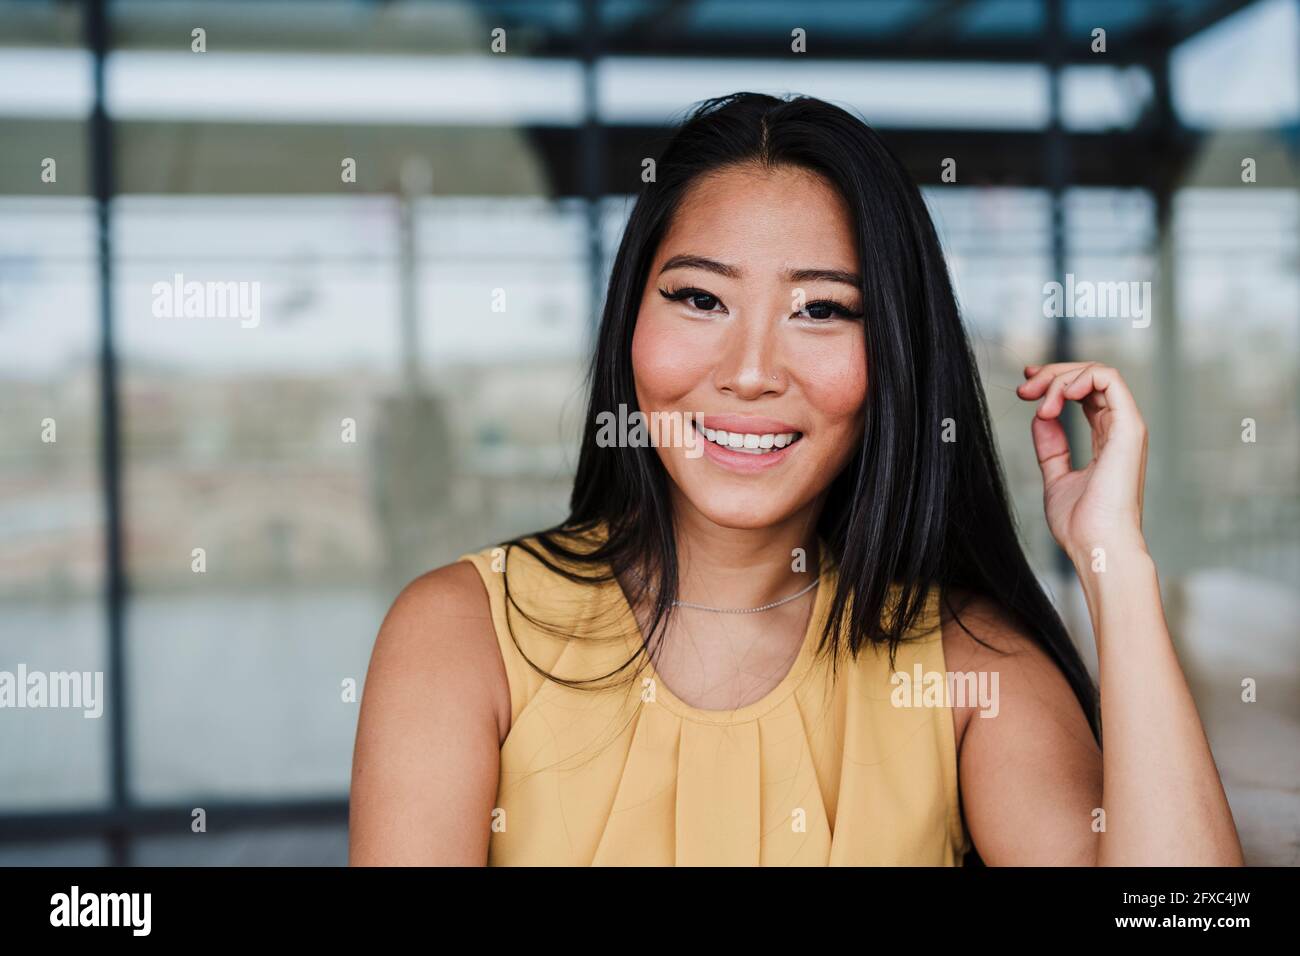 Smiling businesswoman at office cafeteria Stock Photo